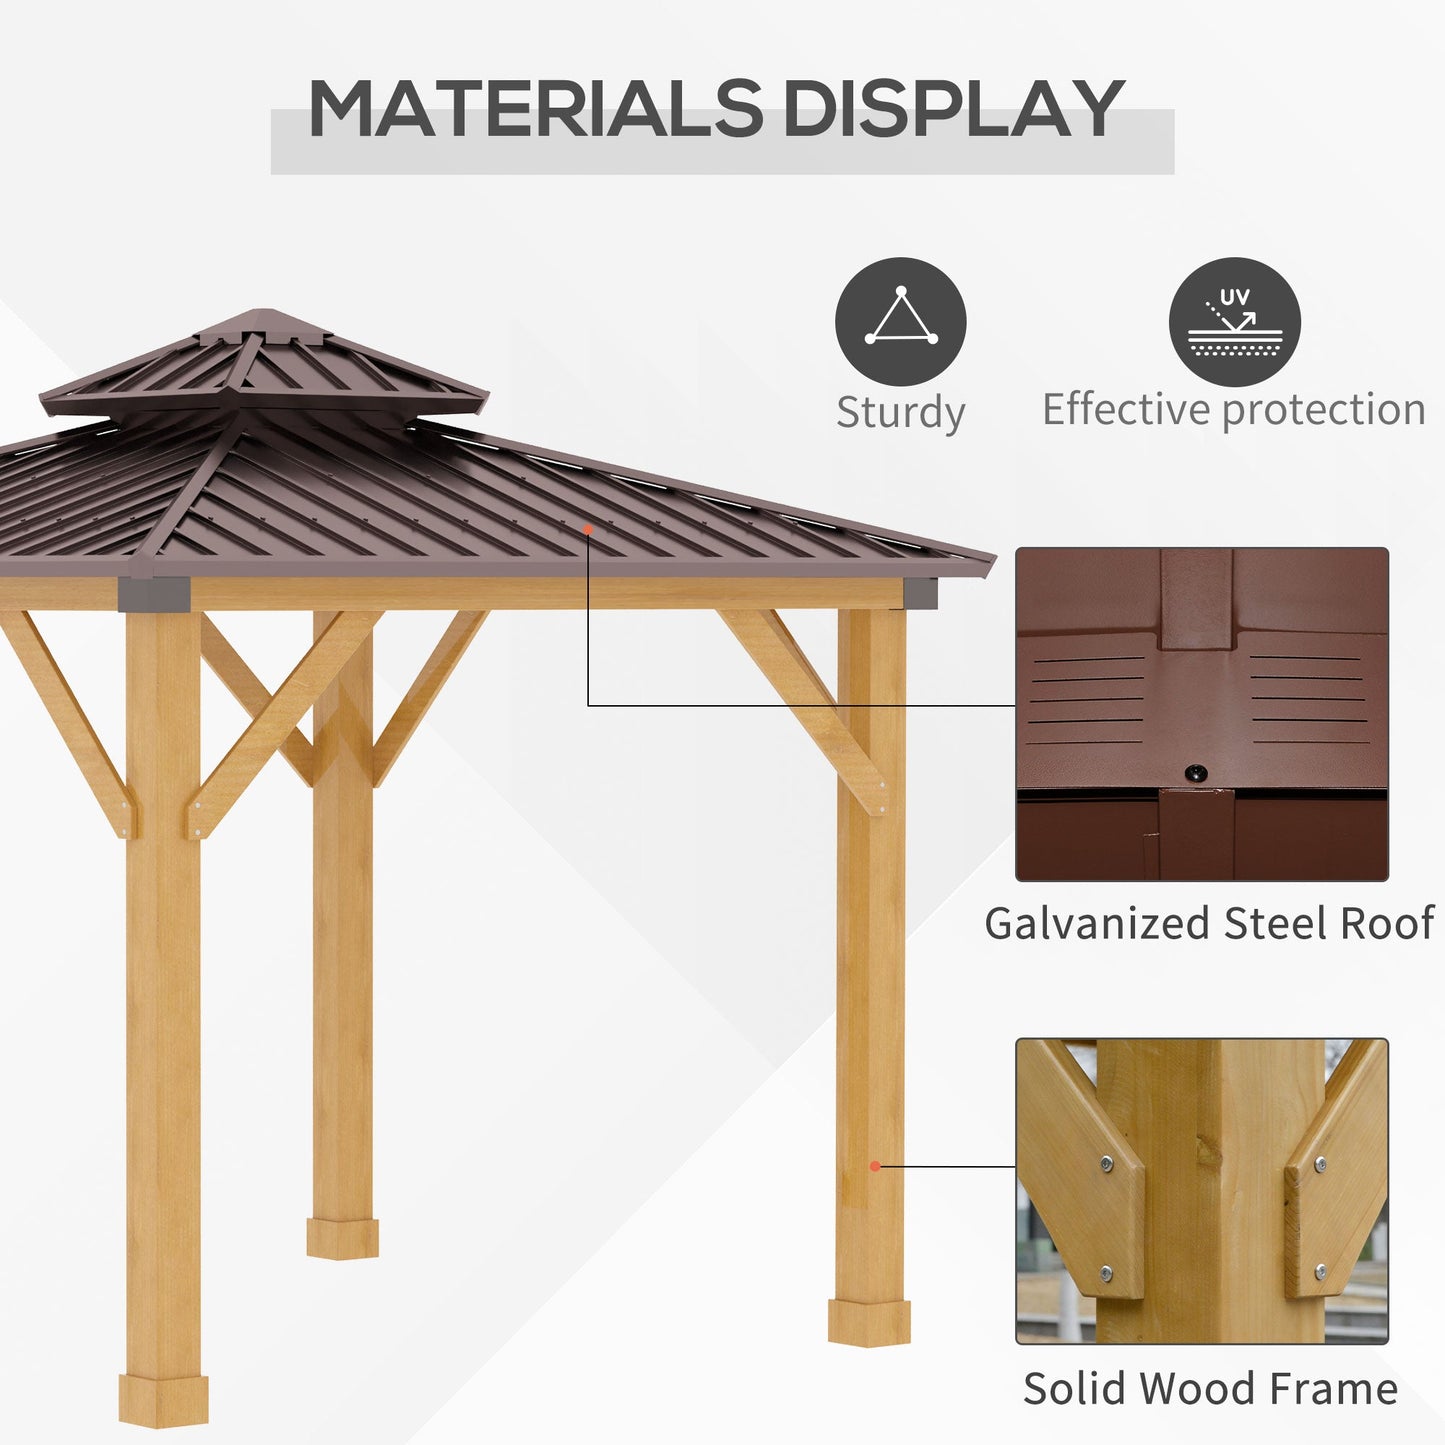 Outdoor and Garden-10' x 10' Hardtop Gazebo Canopy Patio Shelter Outdoor with Solid Wood Frame, Steel Double Tier Roof, Brown - Outdoor Style Company